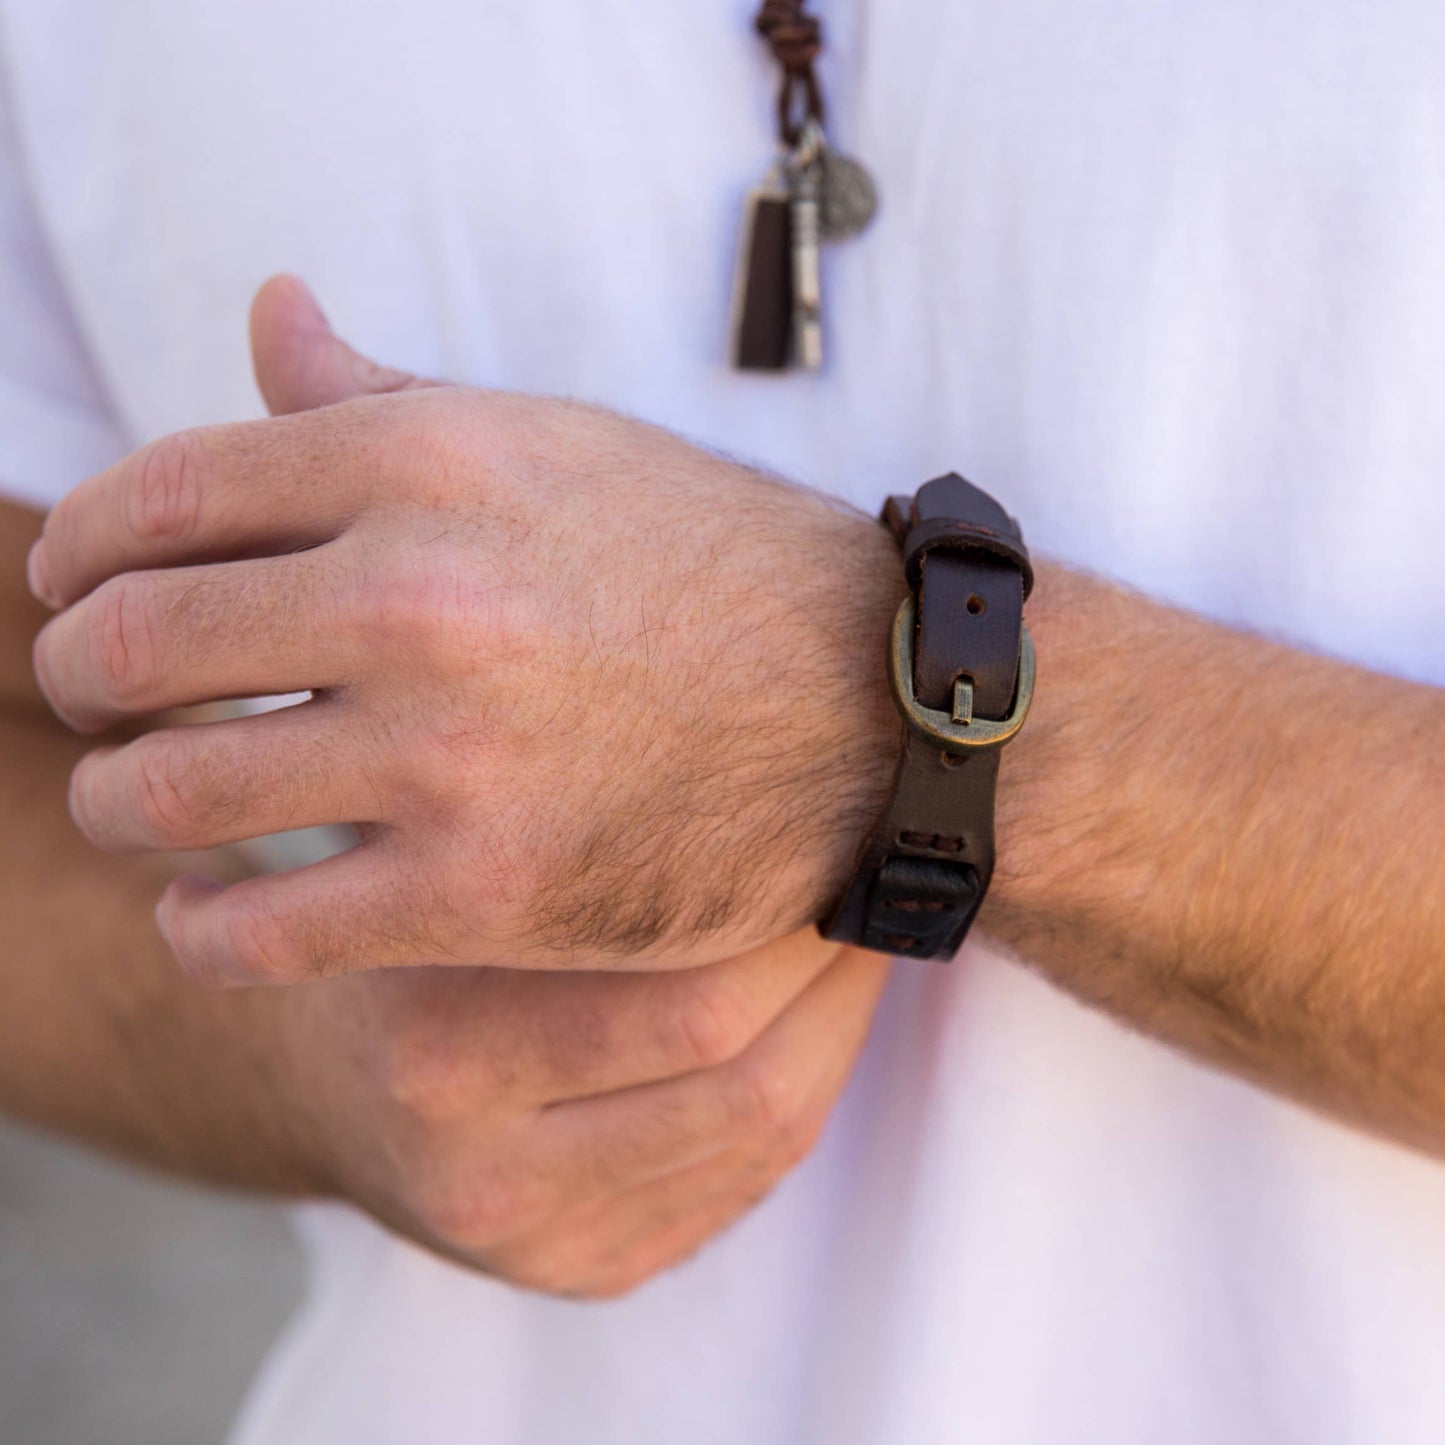 Wide Brown Leather with Buckle Men's Bracelet